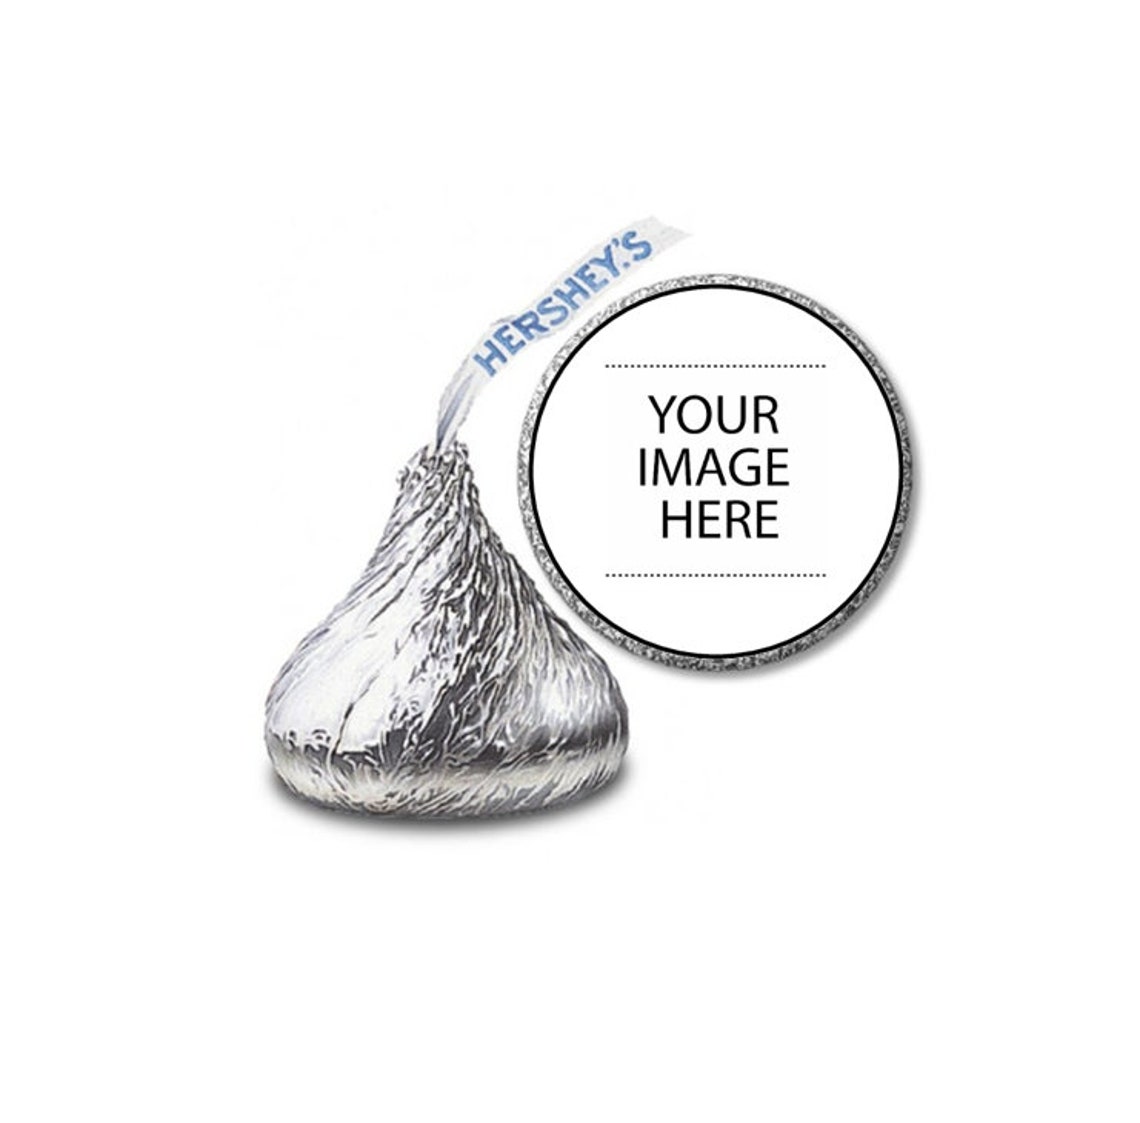 custom-photo-personalized-hershey-kiss-labels-stickers-108-etsy